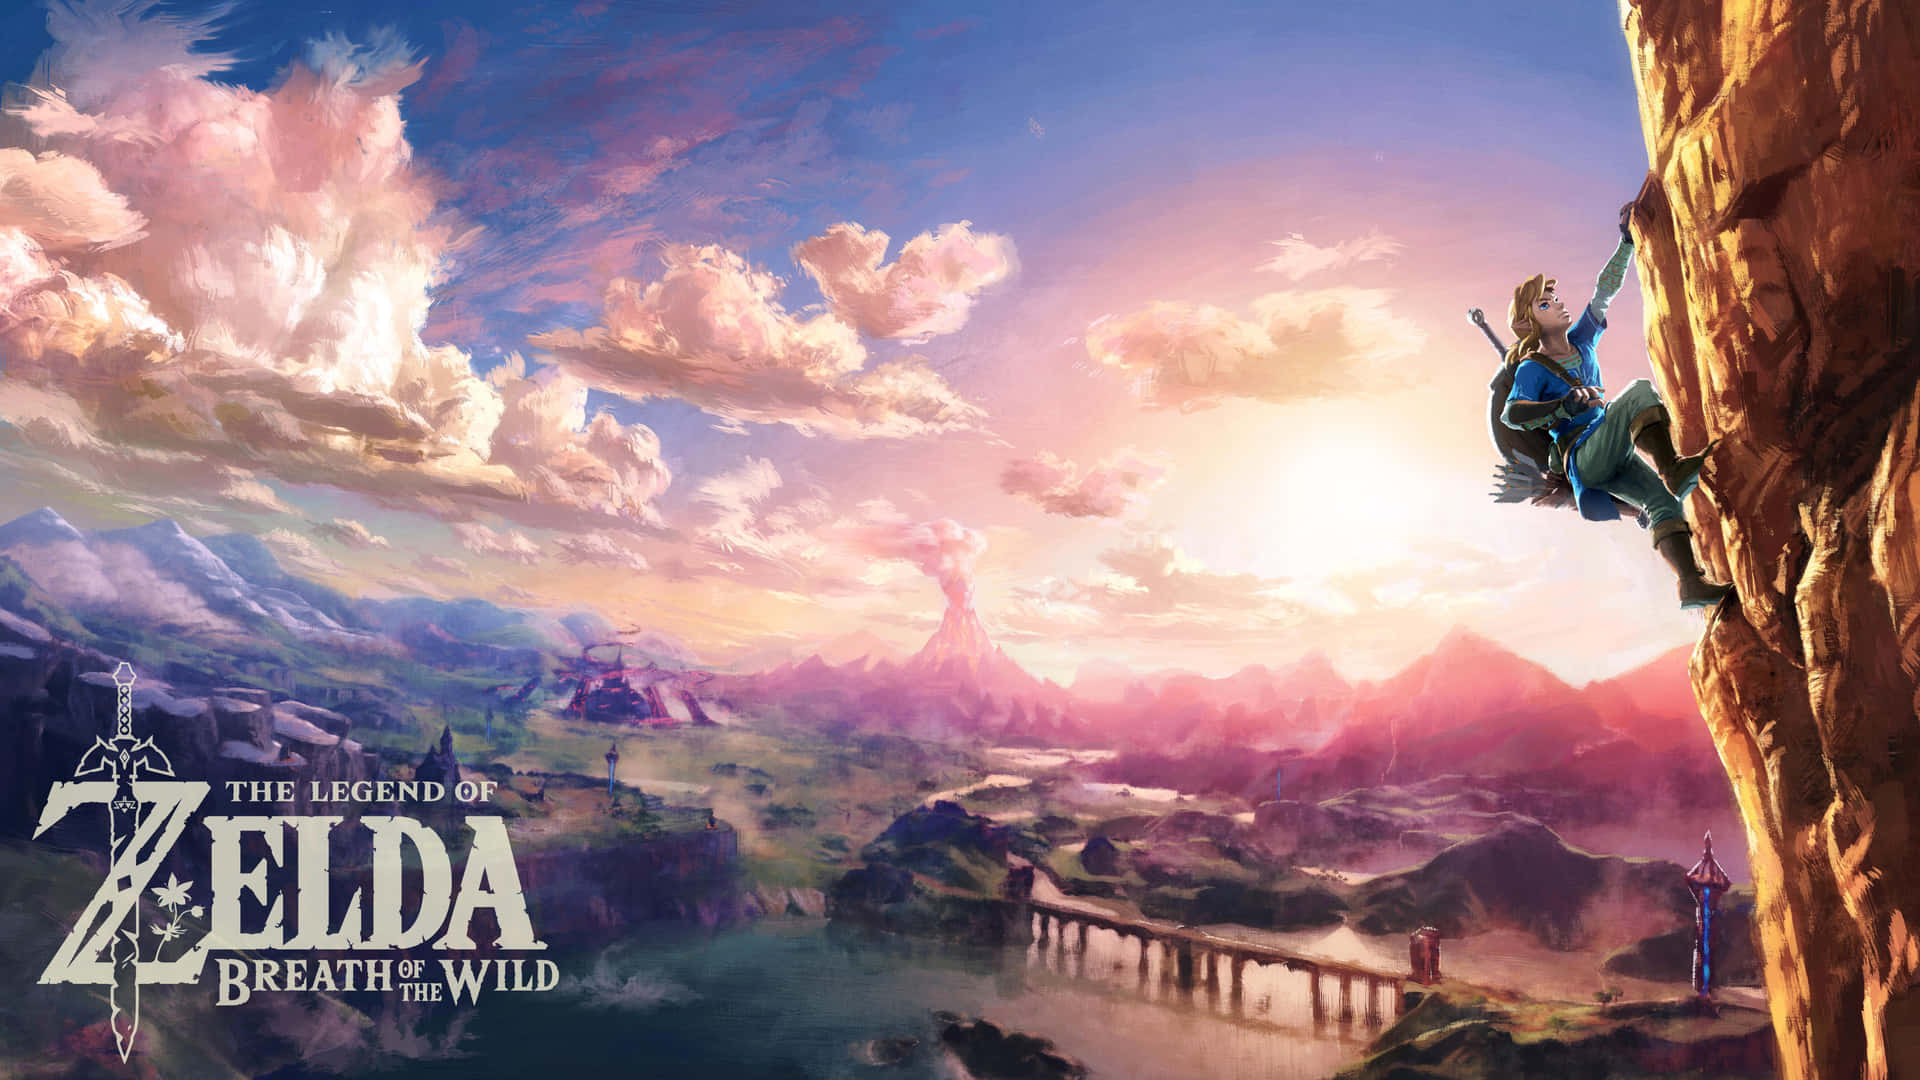 Stunning panoramic view of BotW landscape with a magical sky